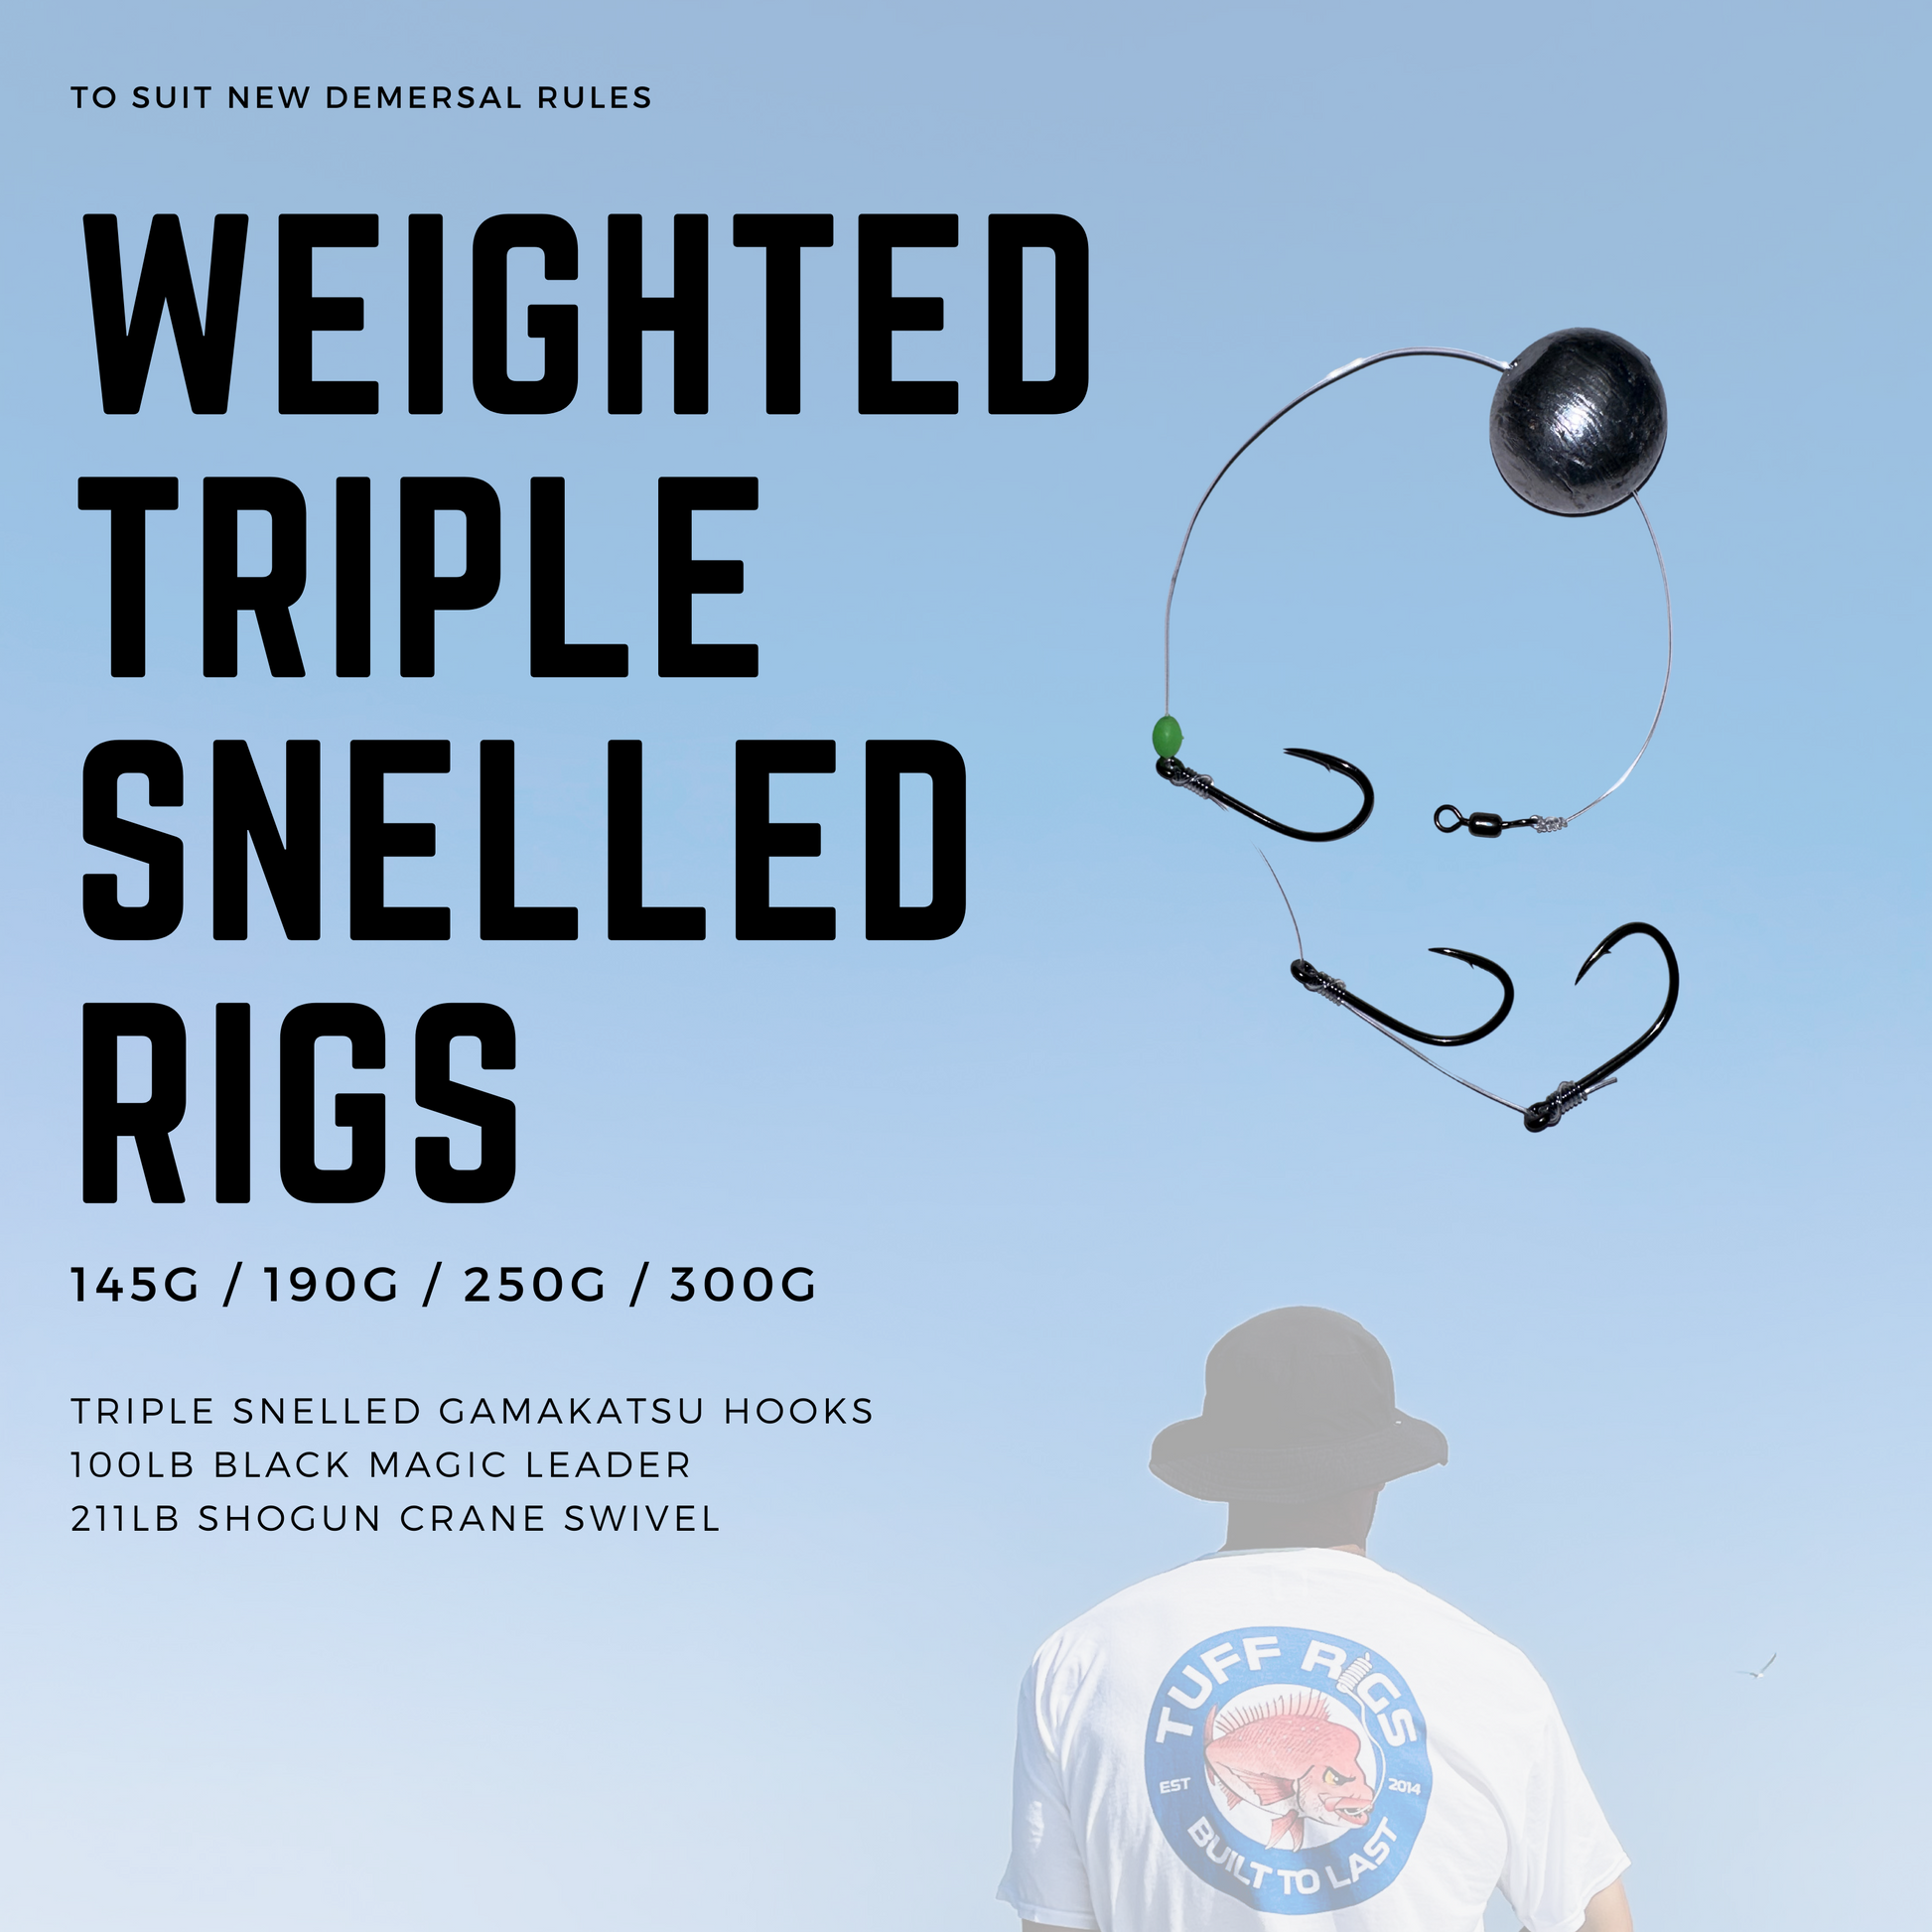 Weighted Triple Snelled Demersal Bait Fishing Rig – Tuff Rigs